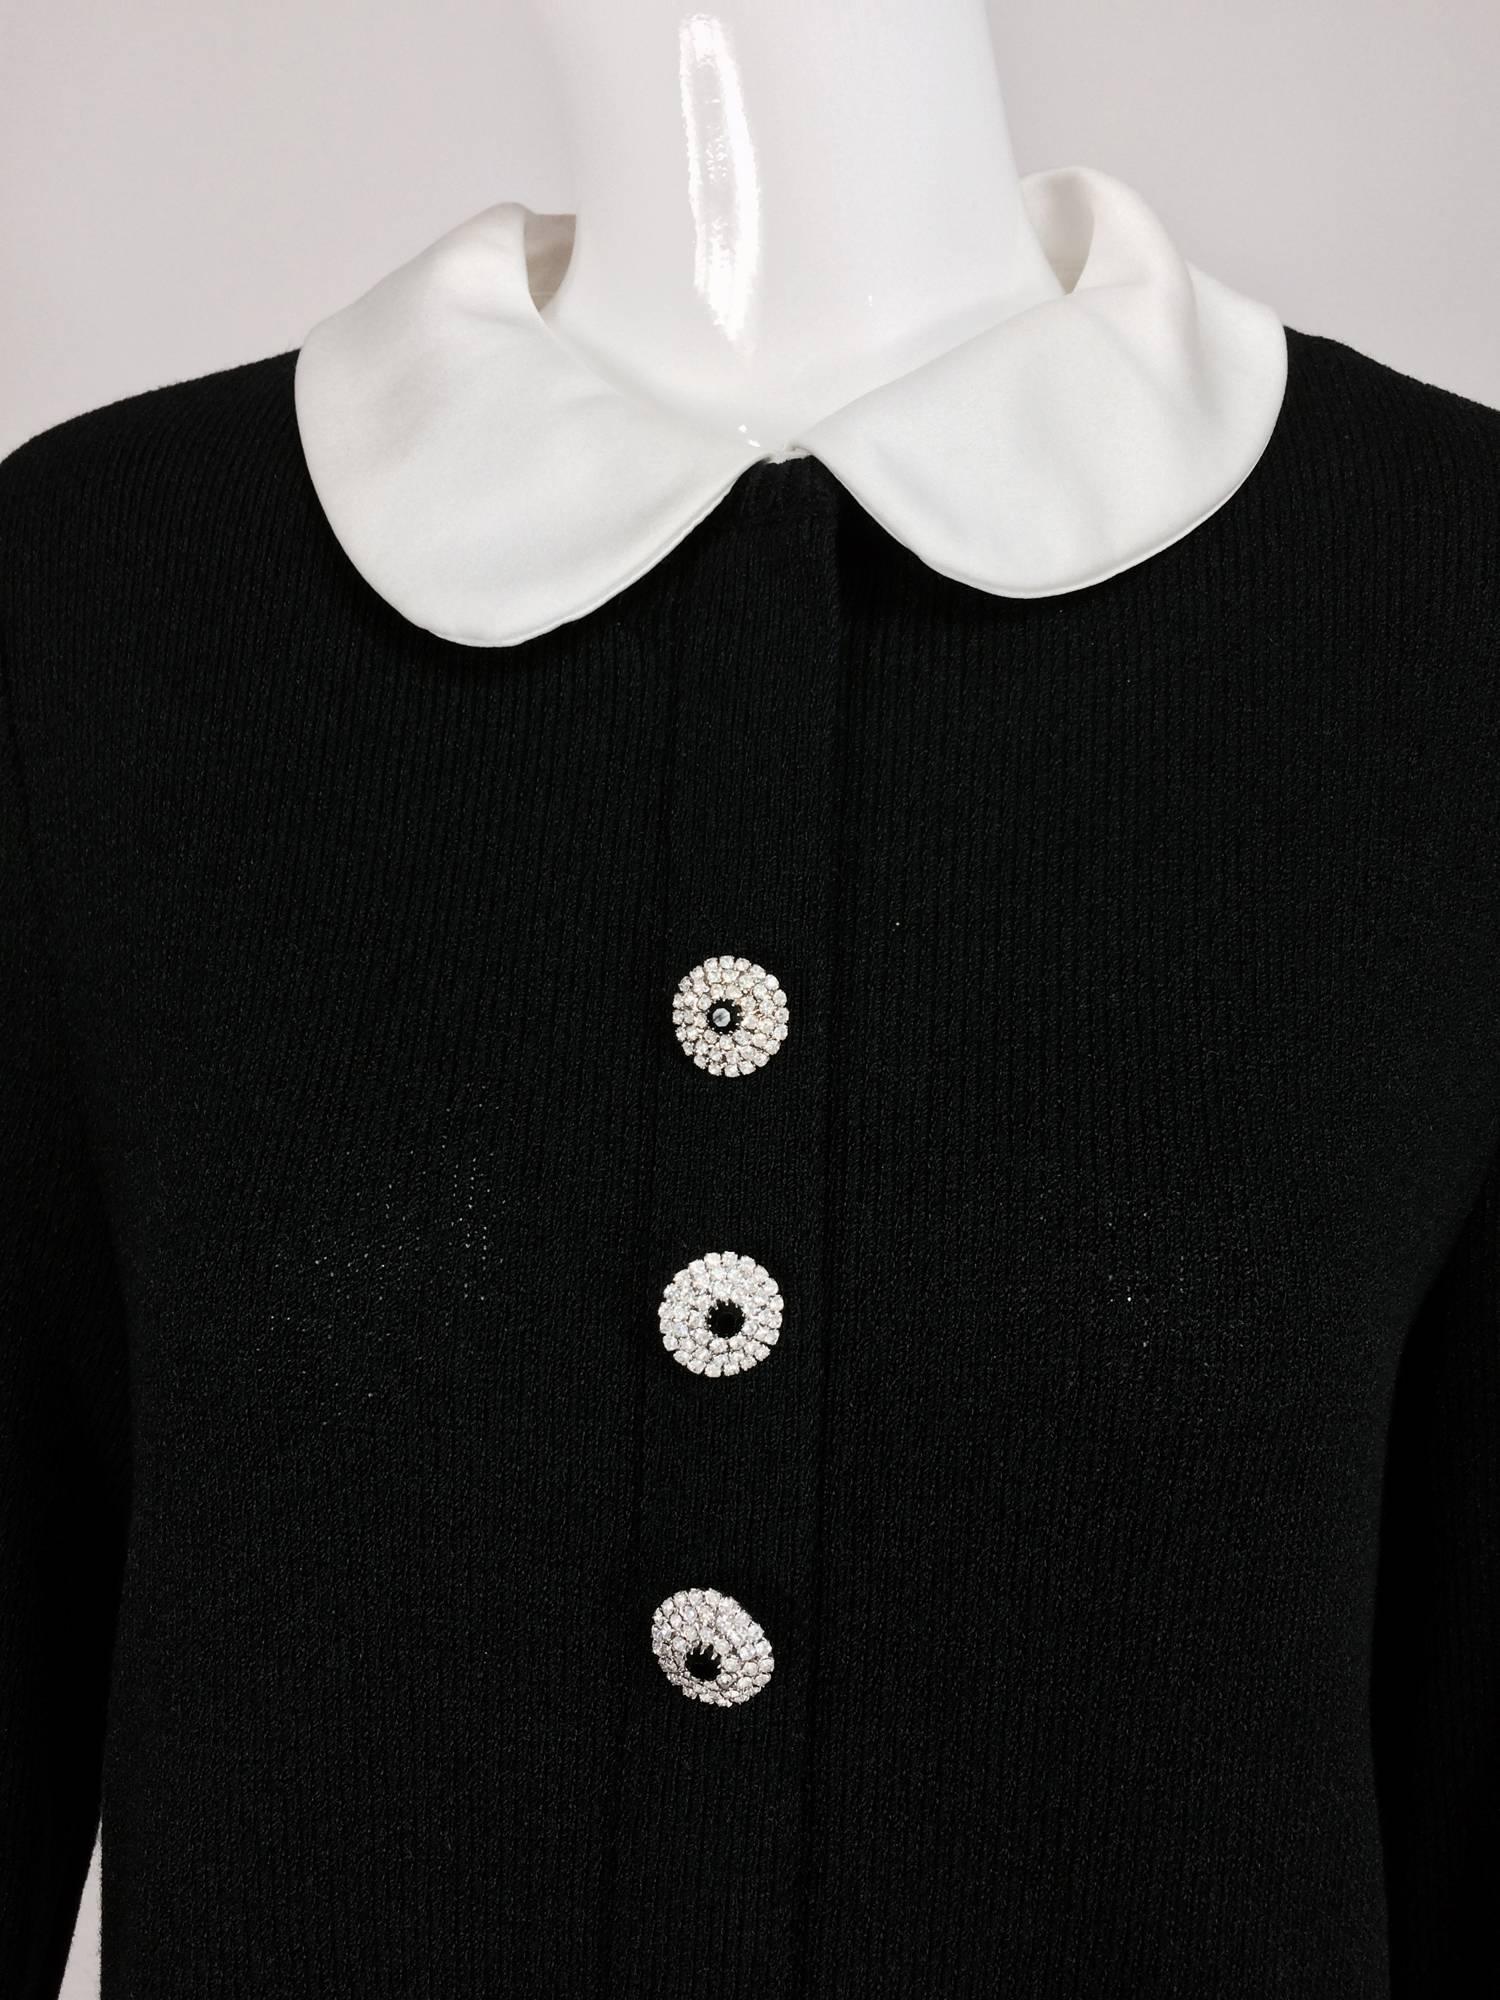 Adolfo black knit A line dress with white satin collar & cuffs 1970s...A line dress with a placket front that closes with rhinestone buttons, white satin button on collar (it's removable)...Long sleeves with white satin cuffs and rhinestone buttons